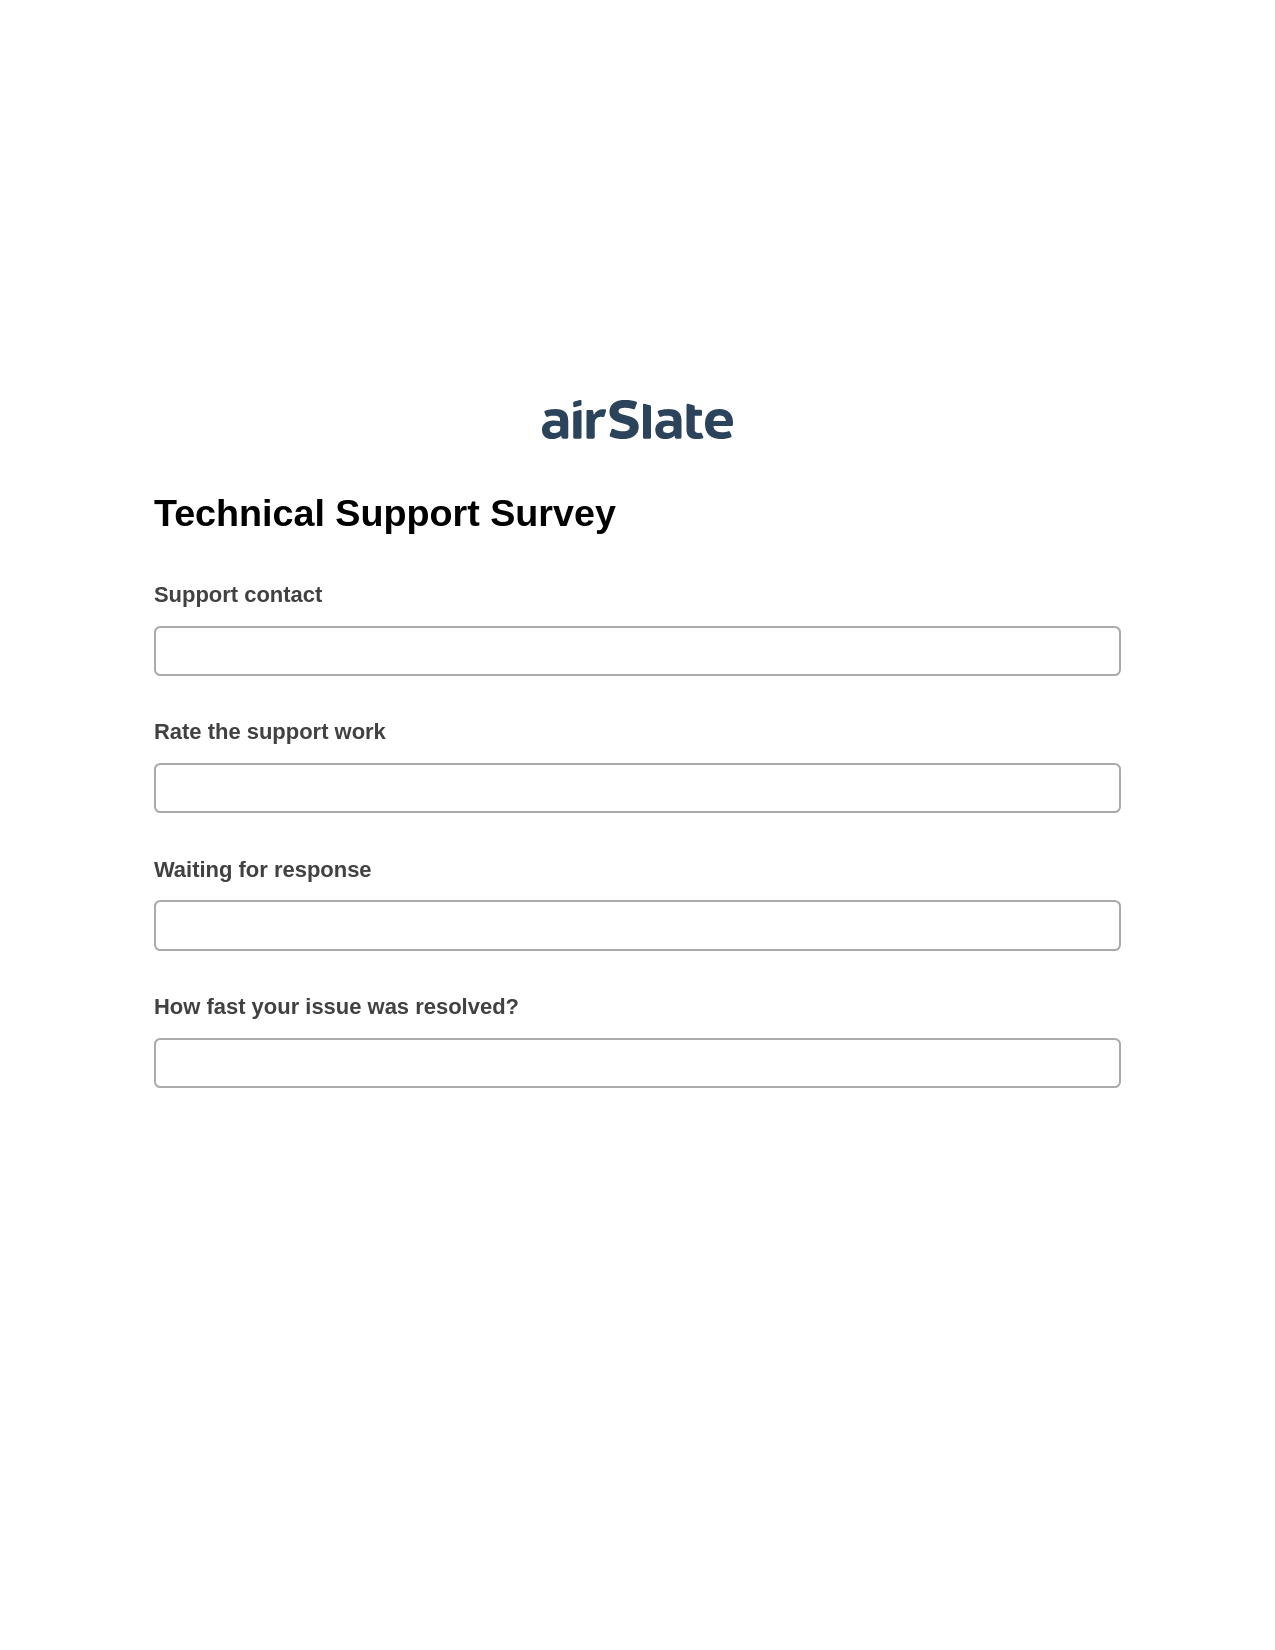 Technical Support Survey Prefill from NetSuite records, Reminder Bot, Archive to Box Bot